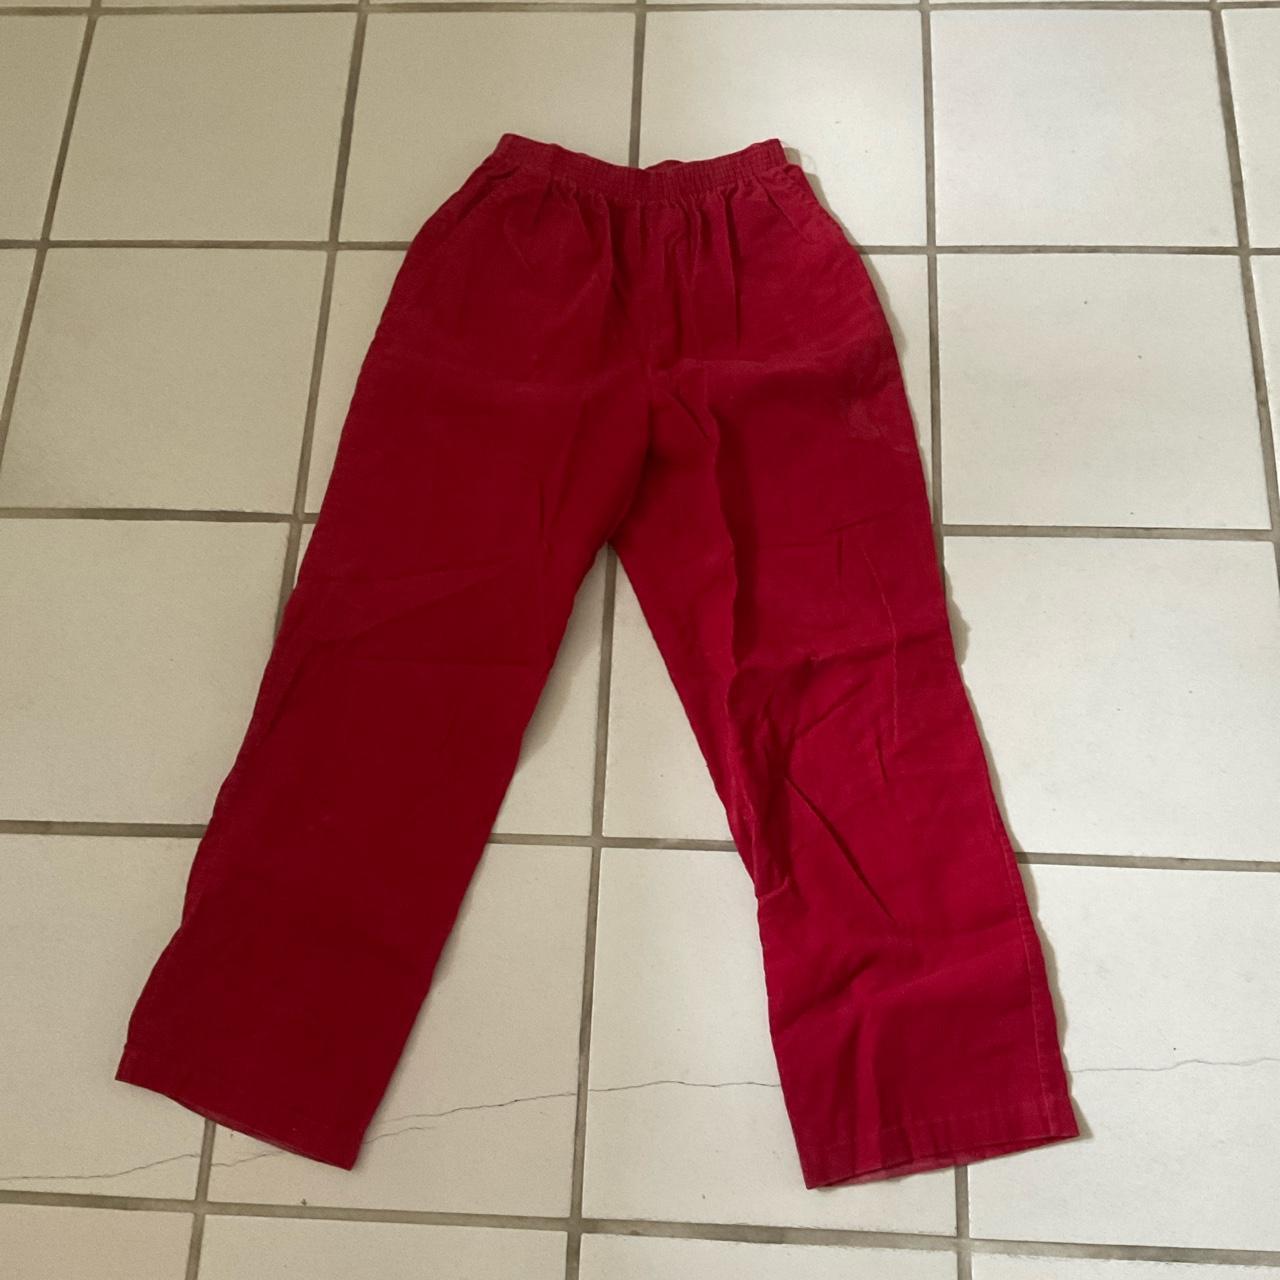 Product Image 1 - Red oversized skater pants with